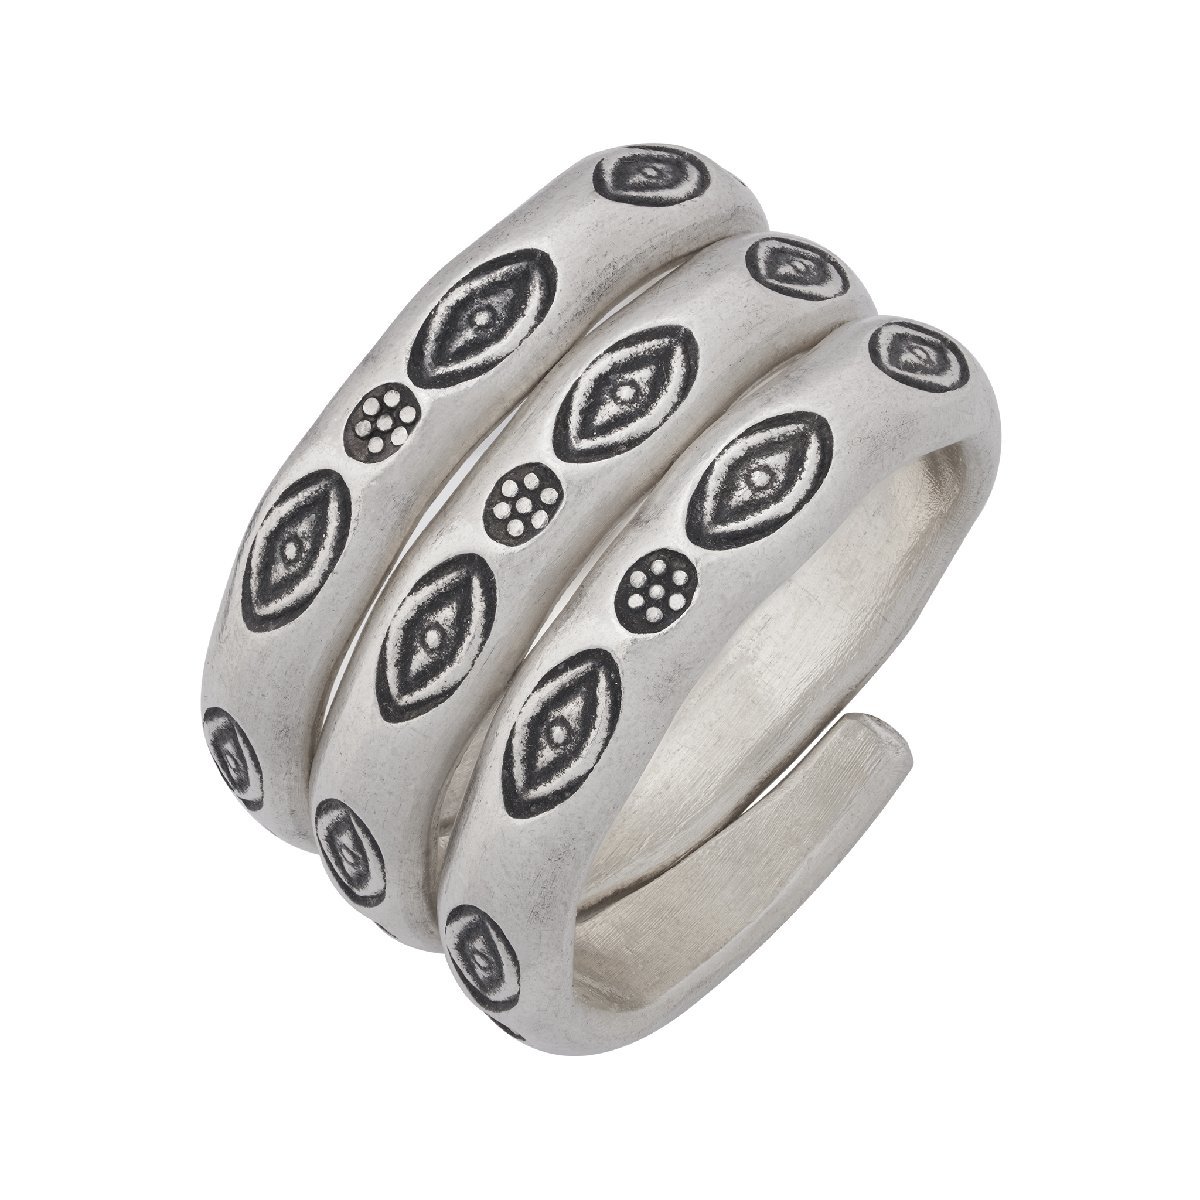 21 number adjustment Curren group silver ring 11 number ~29 number free size ring wide width very thick men's lady's eye writing sama ... amulet SV950 a07-30